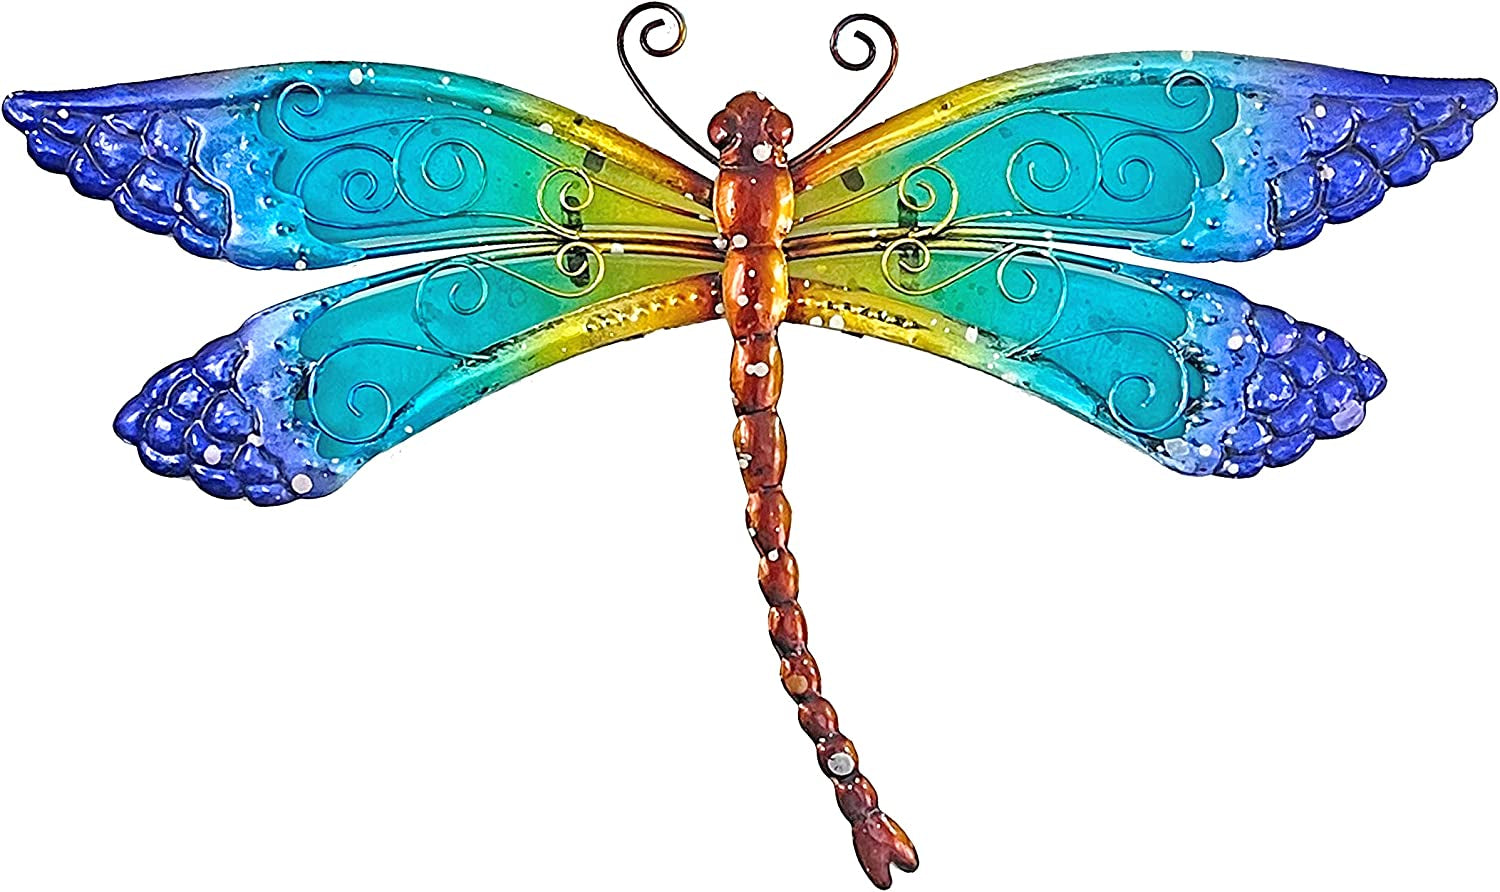 SOTALING, SOTALING Metal with Glass Dragonfly Wall Decor Handmade Decorative Art for Home,Garden,Patio,Door,Window